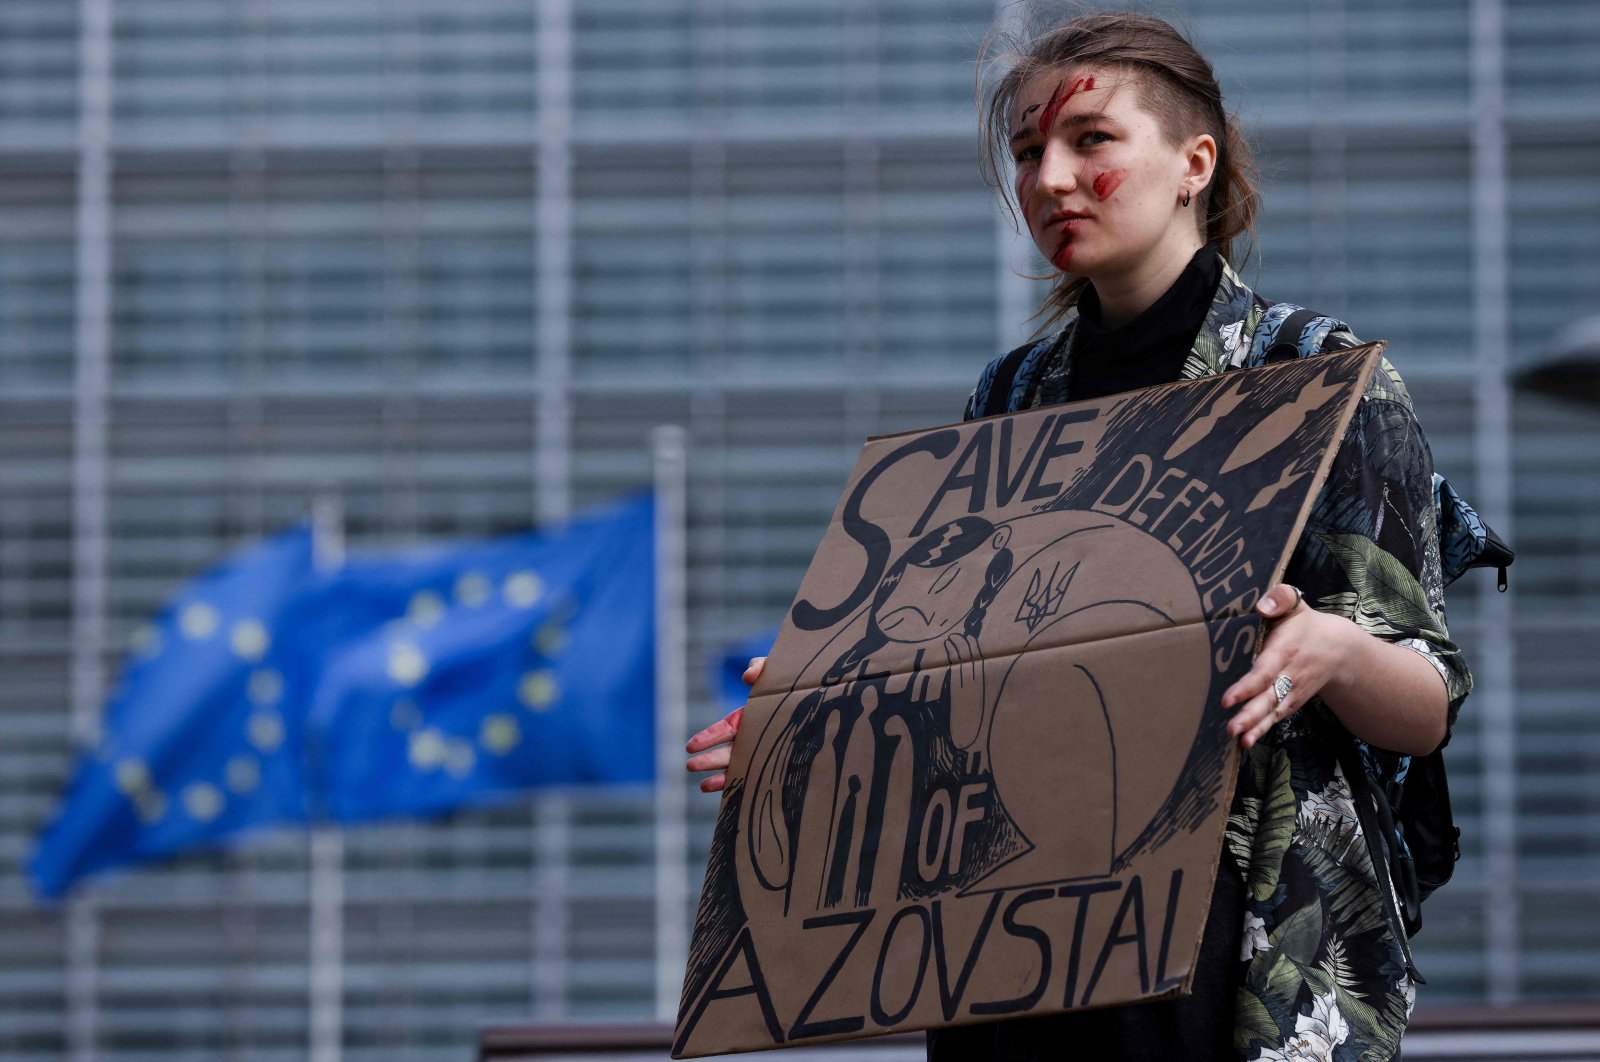 A woman takes part in a rally to call EU countries to "stop buying Russian gas and save defenders of Azovstal" as EU foreign ministers hold a meeting over the war in Ukraine, near the European Council headquarters in Brussels, Belgium, May 16, 2022. (AFP Photo)